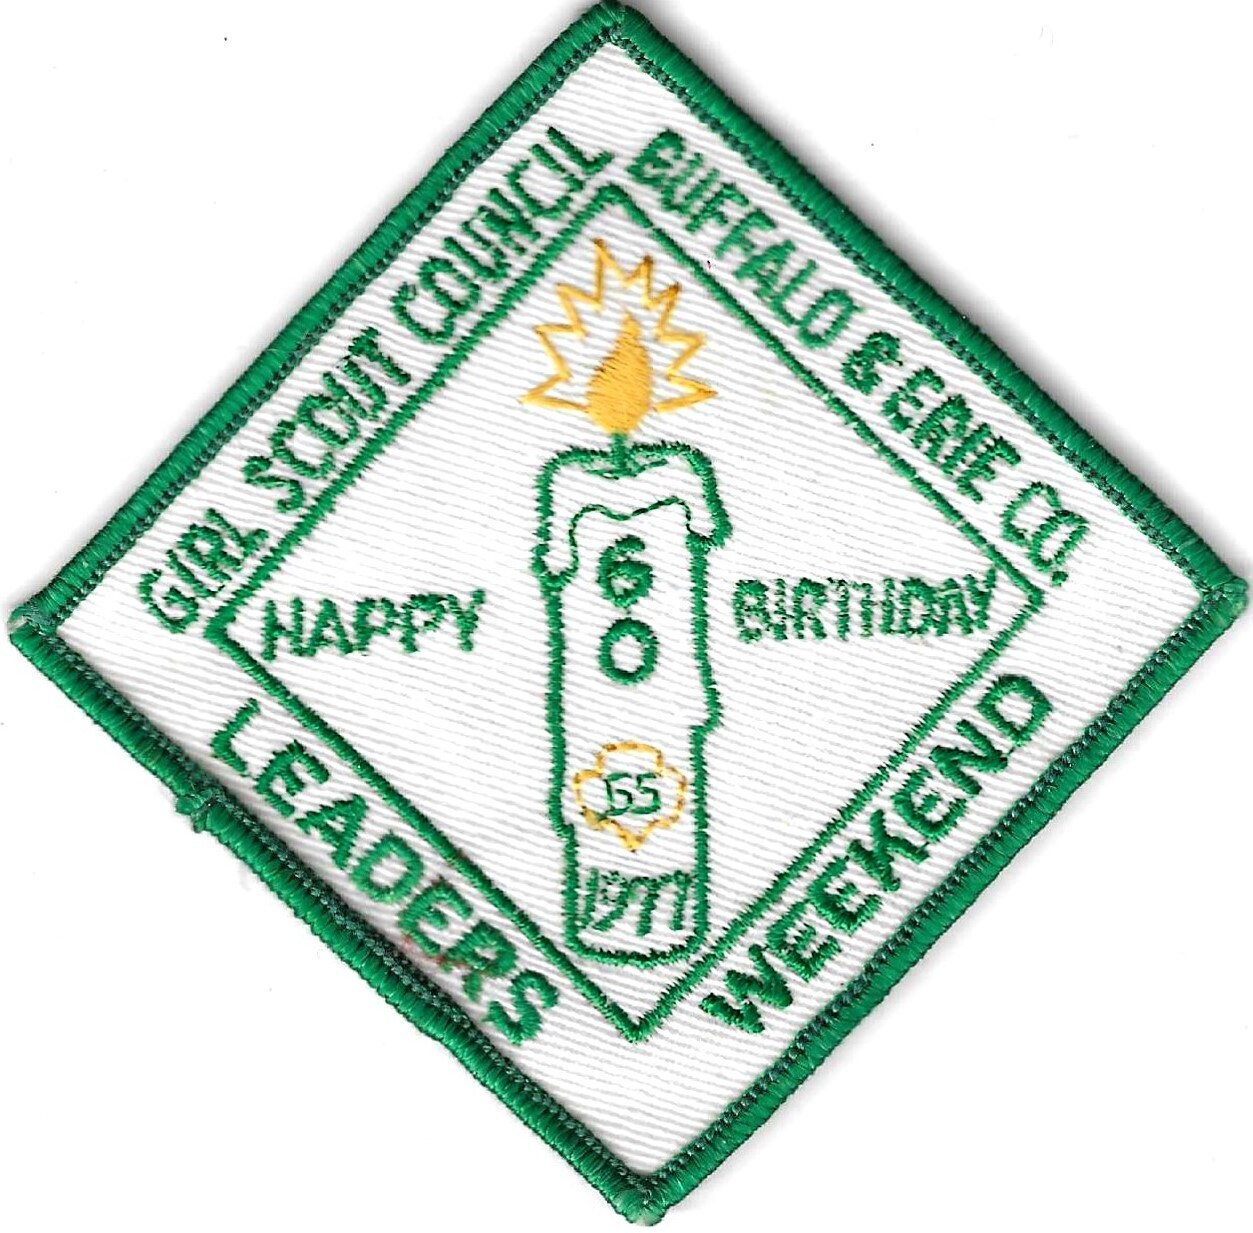 Buffalo & Erie Co GSC 60th anniversary council patch (NY)